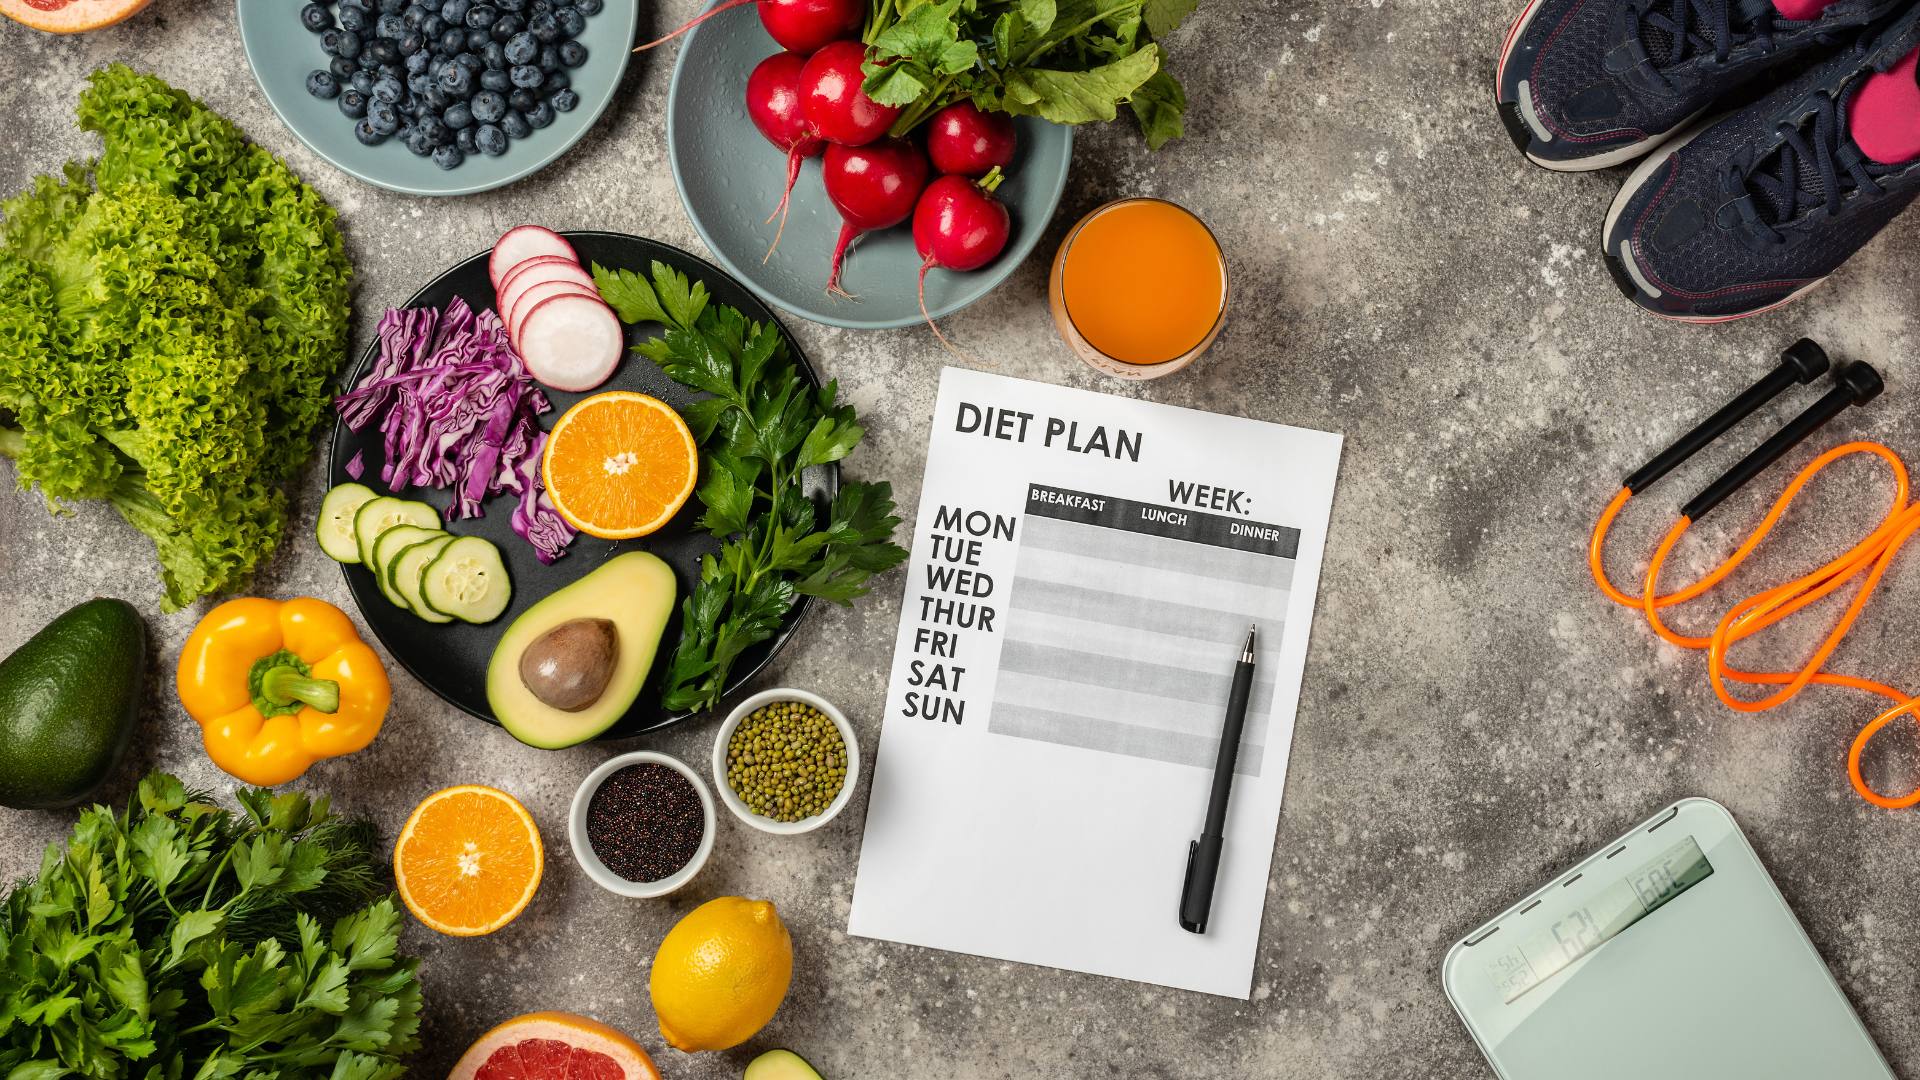 Fruits and vegetables are scattered on a table, accompanied by gym sneakers, a jump rope, a scale, and a notepad with the words "Diet Plan" at the top. These are some tips for losing weight.